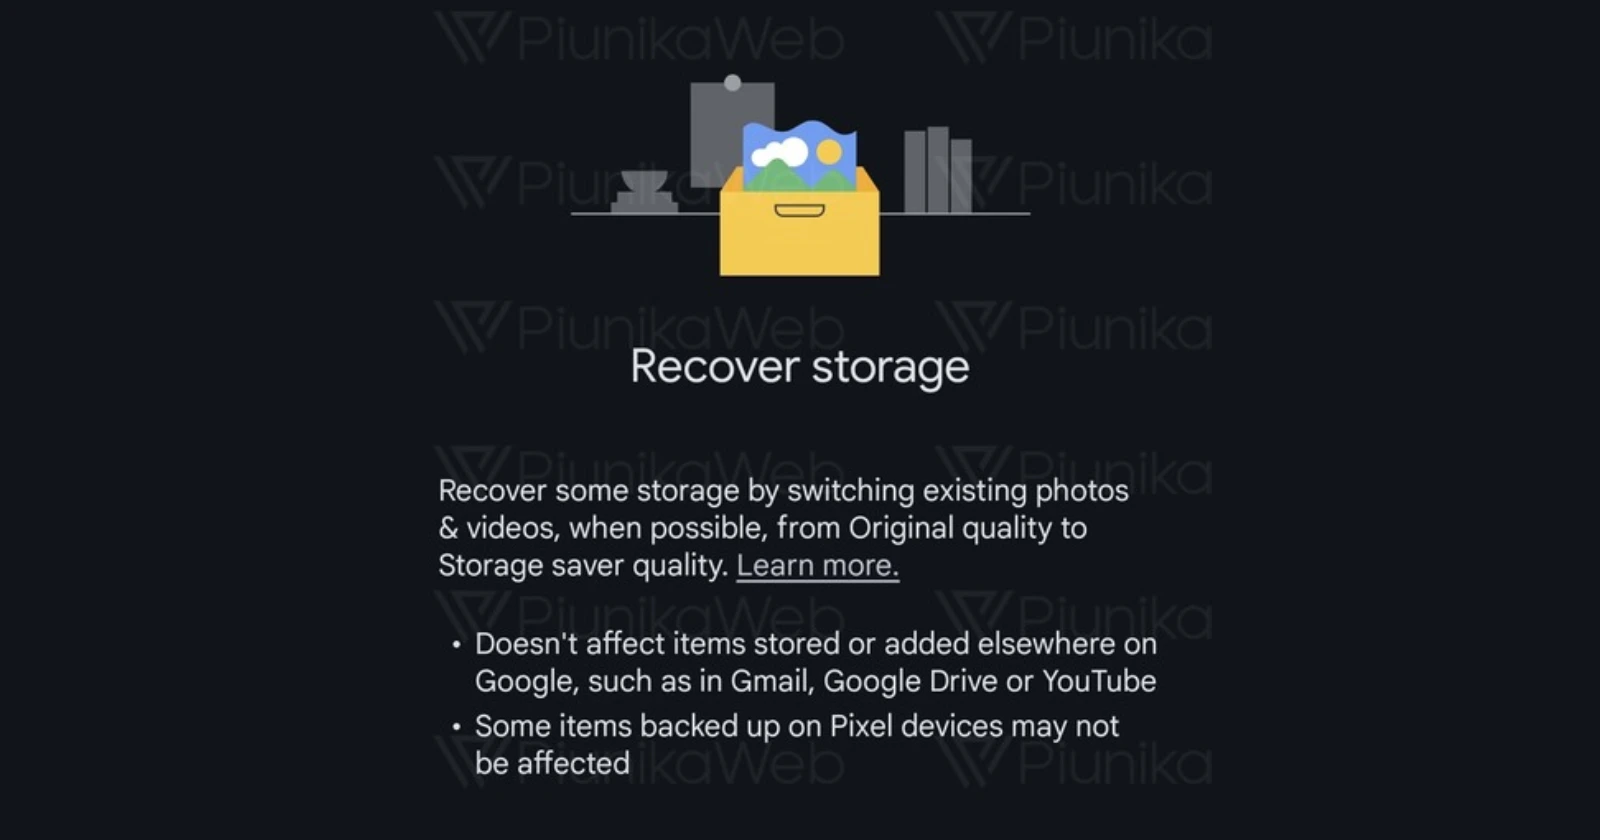 Google Photos app to get 'Recover storage' option to quickly free up cloud storage space